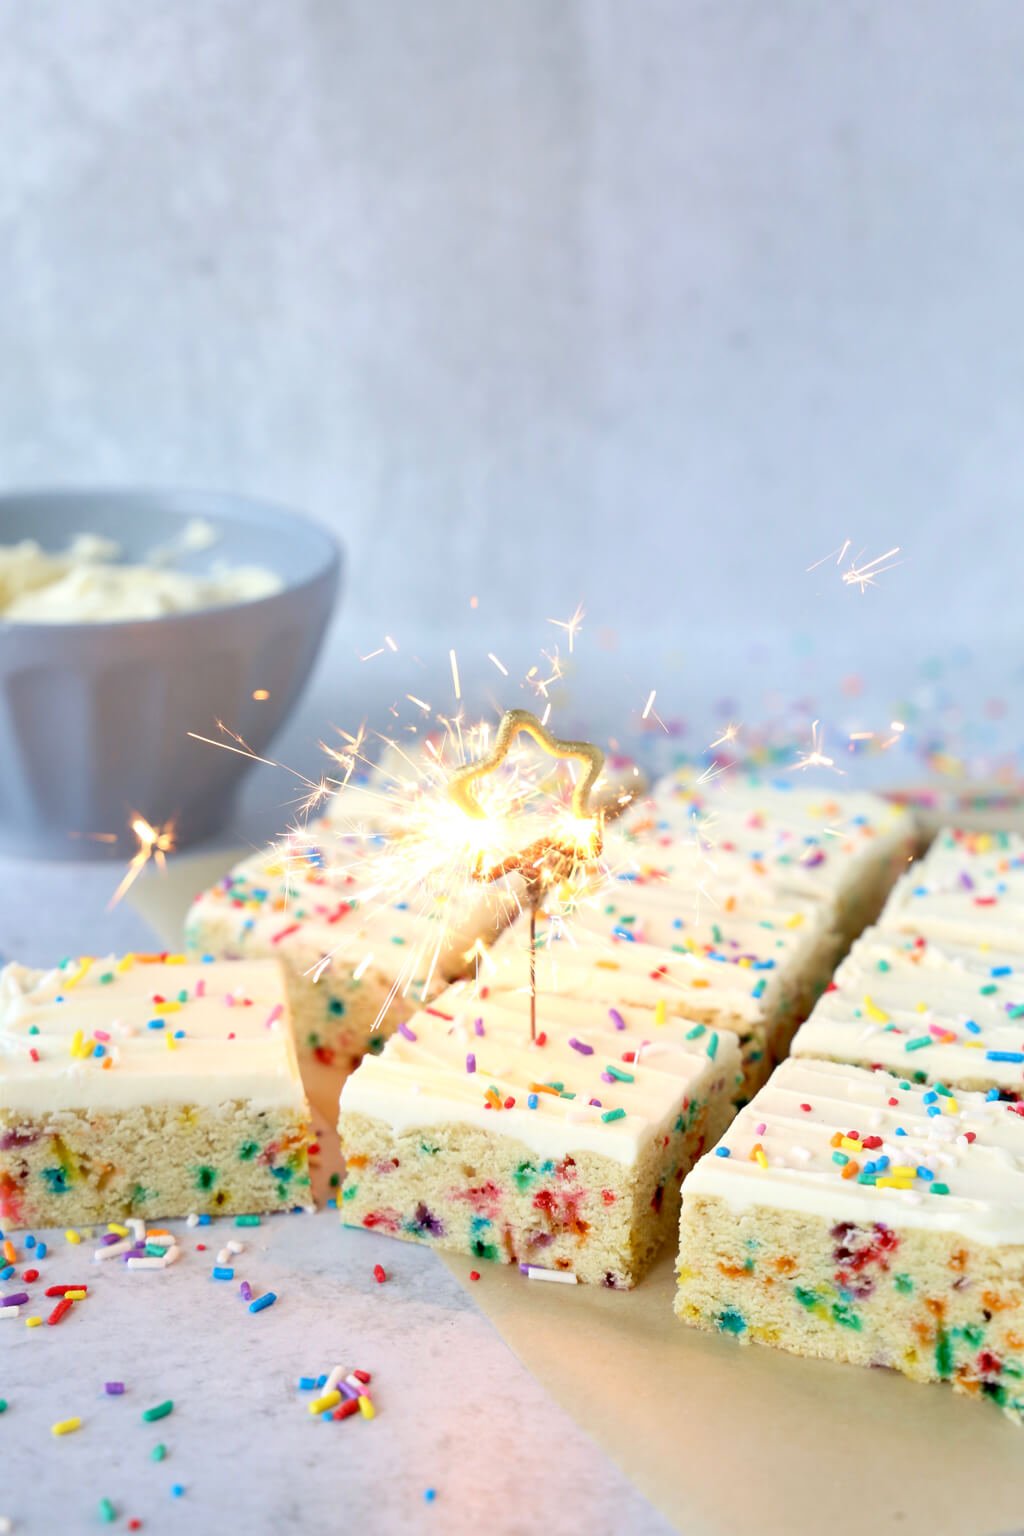 Sugar cookie bars with a star shaped candle burning in one